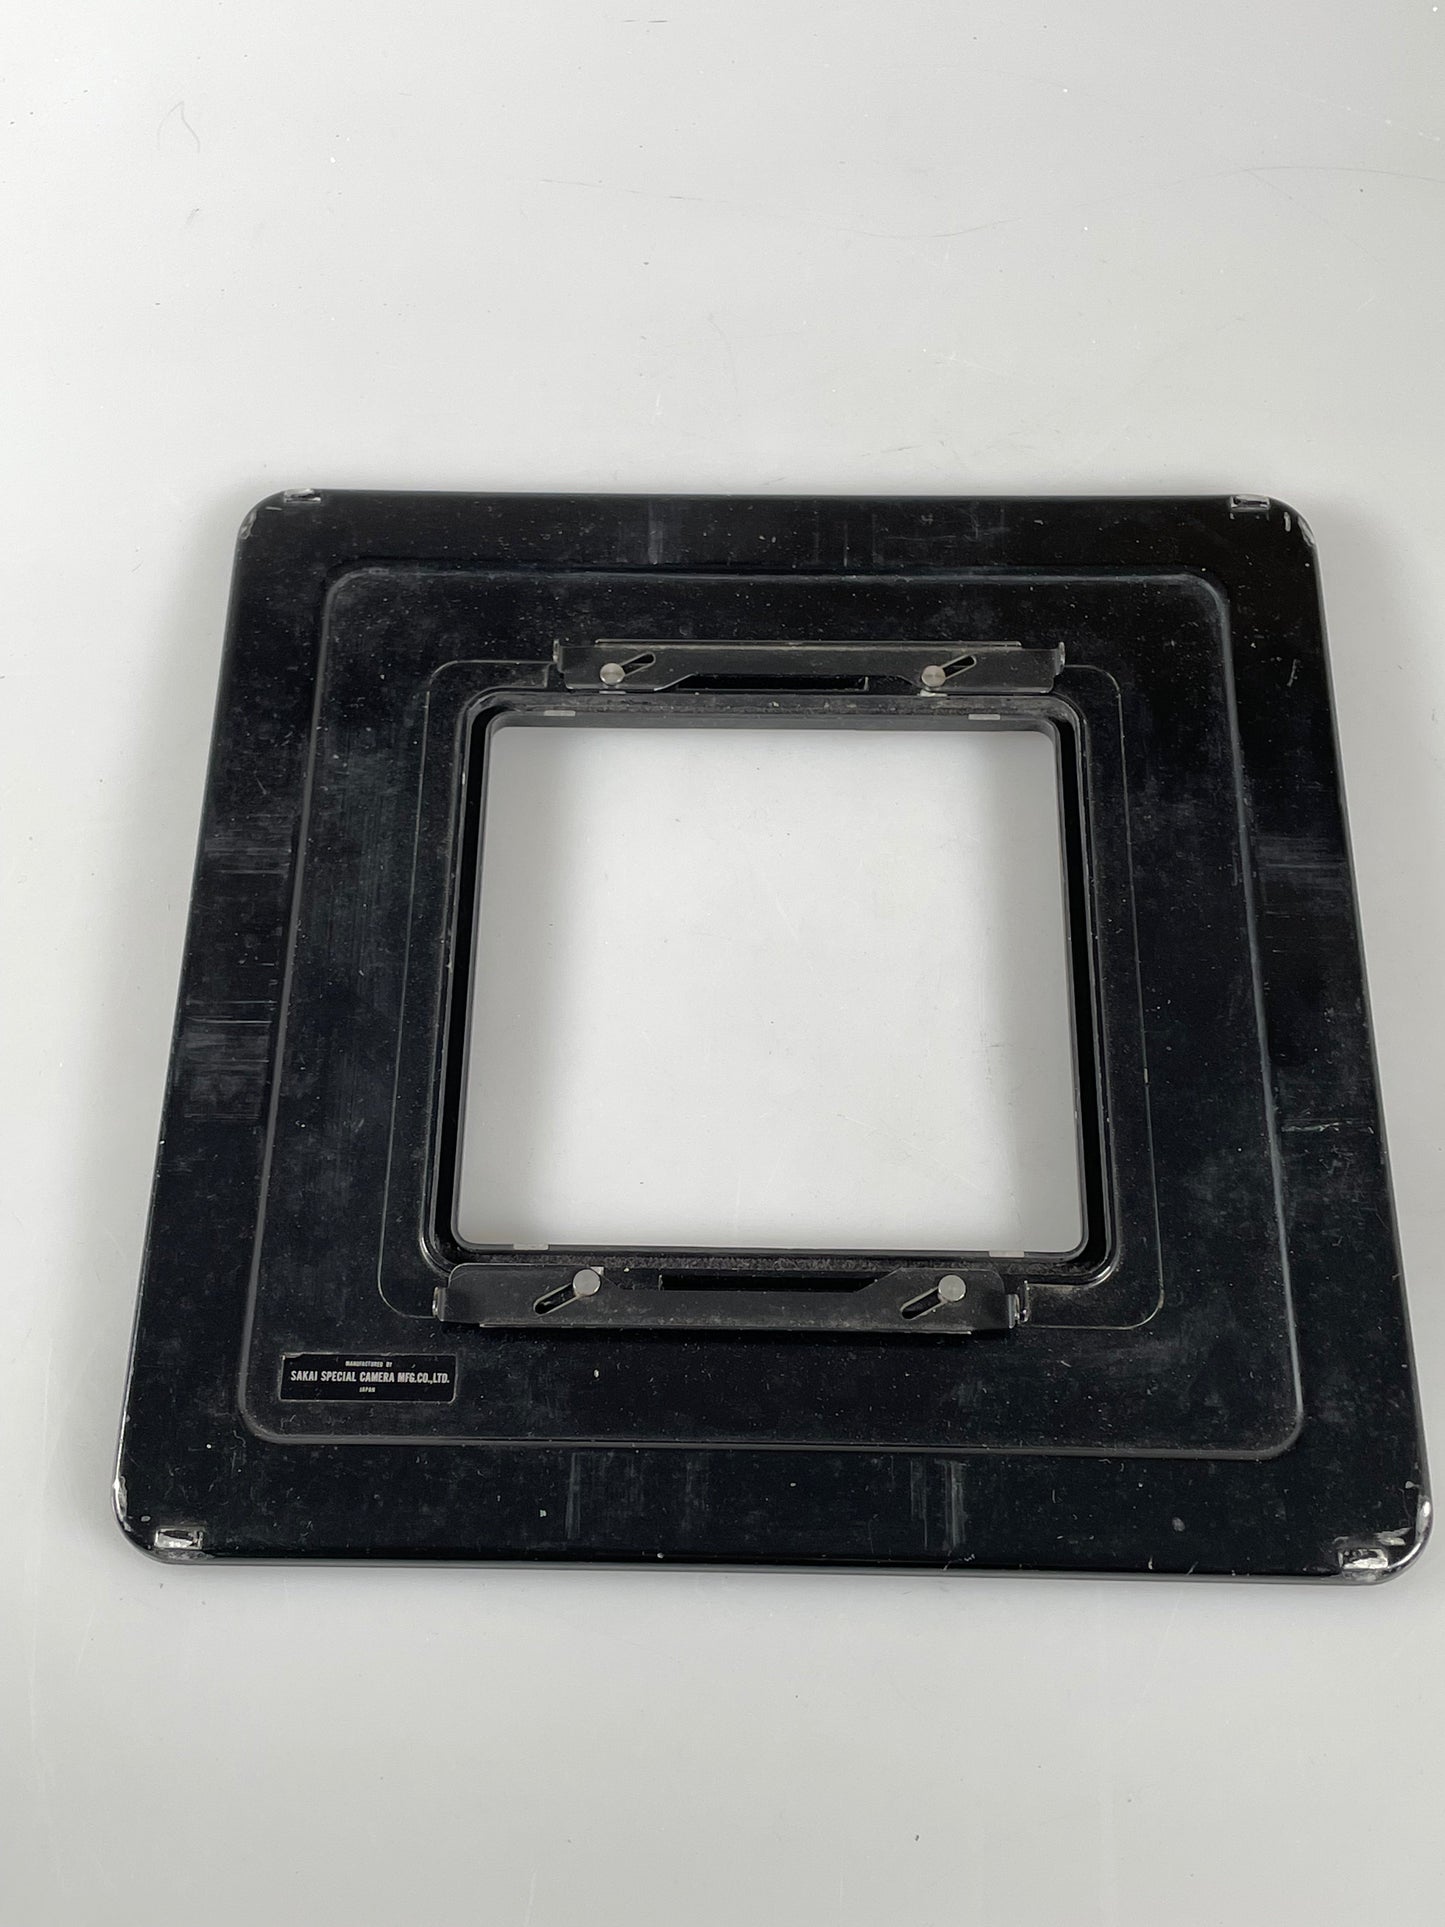 Toyo View 8x10 Lens board adapter